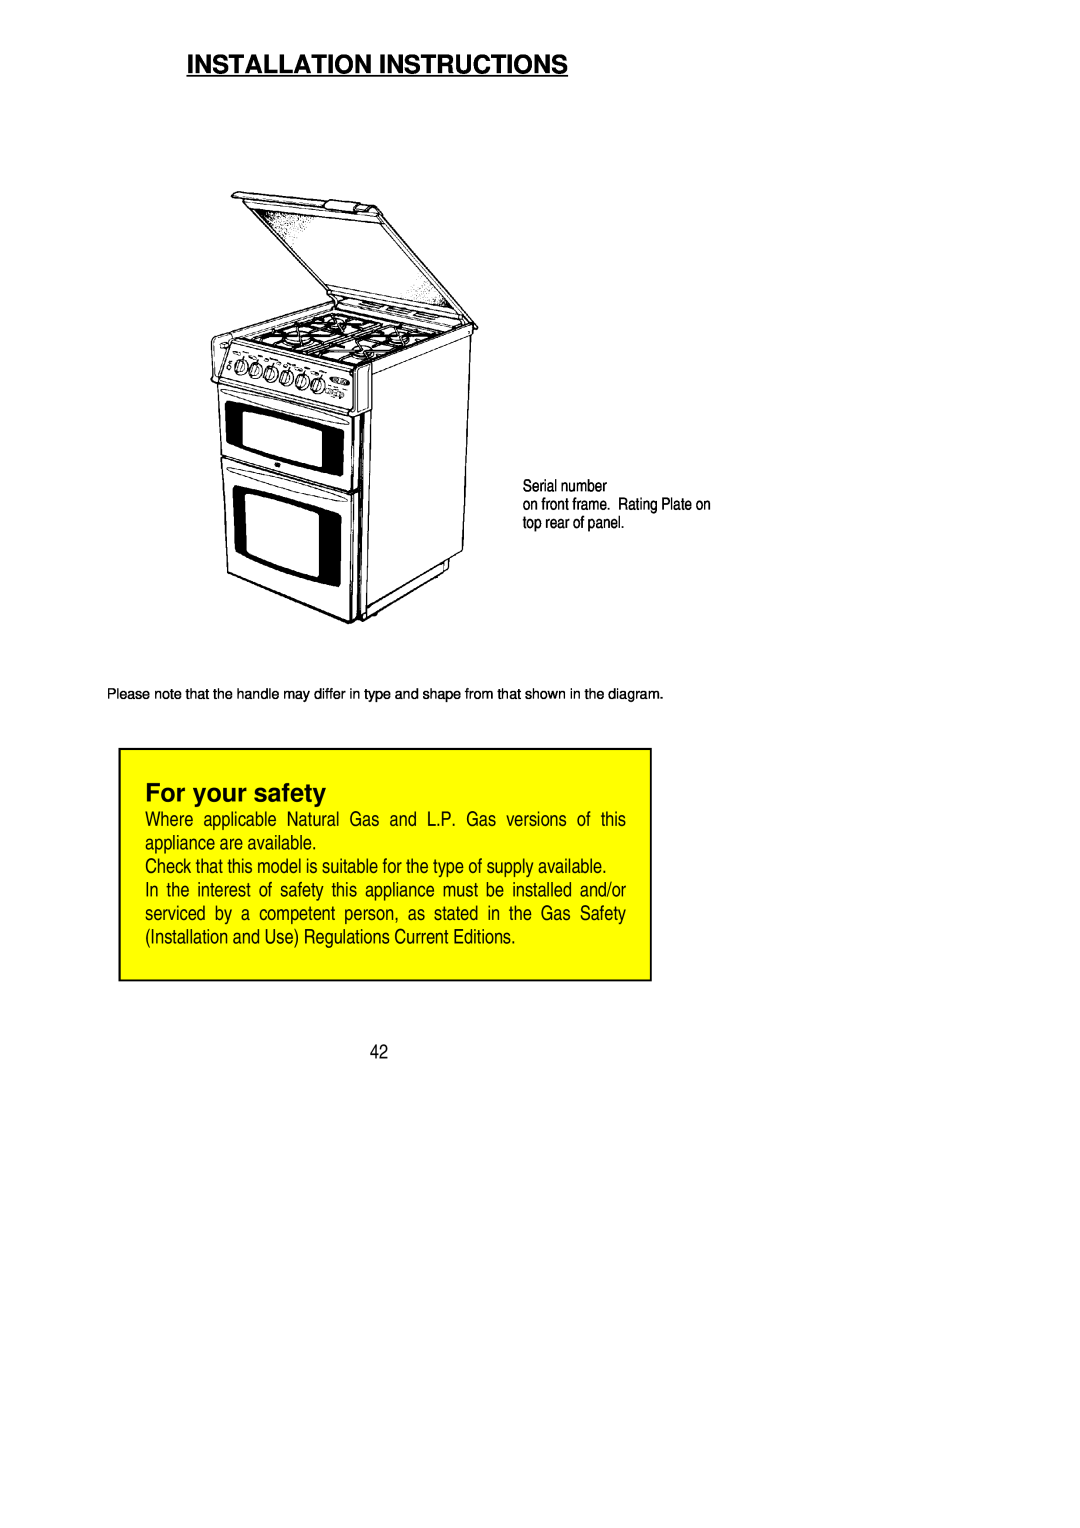 Electrolux SIG 505 X installation instructions Installation Instructions, For your safety 